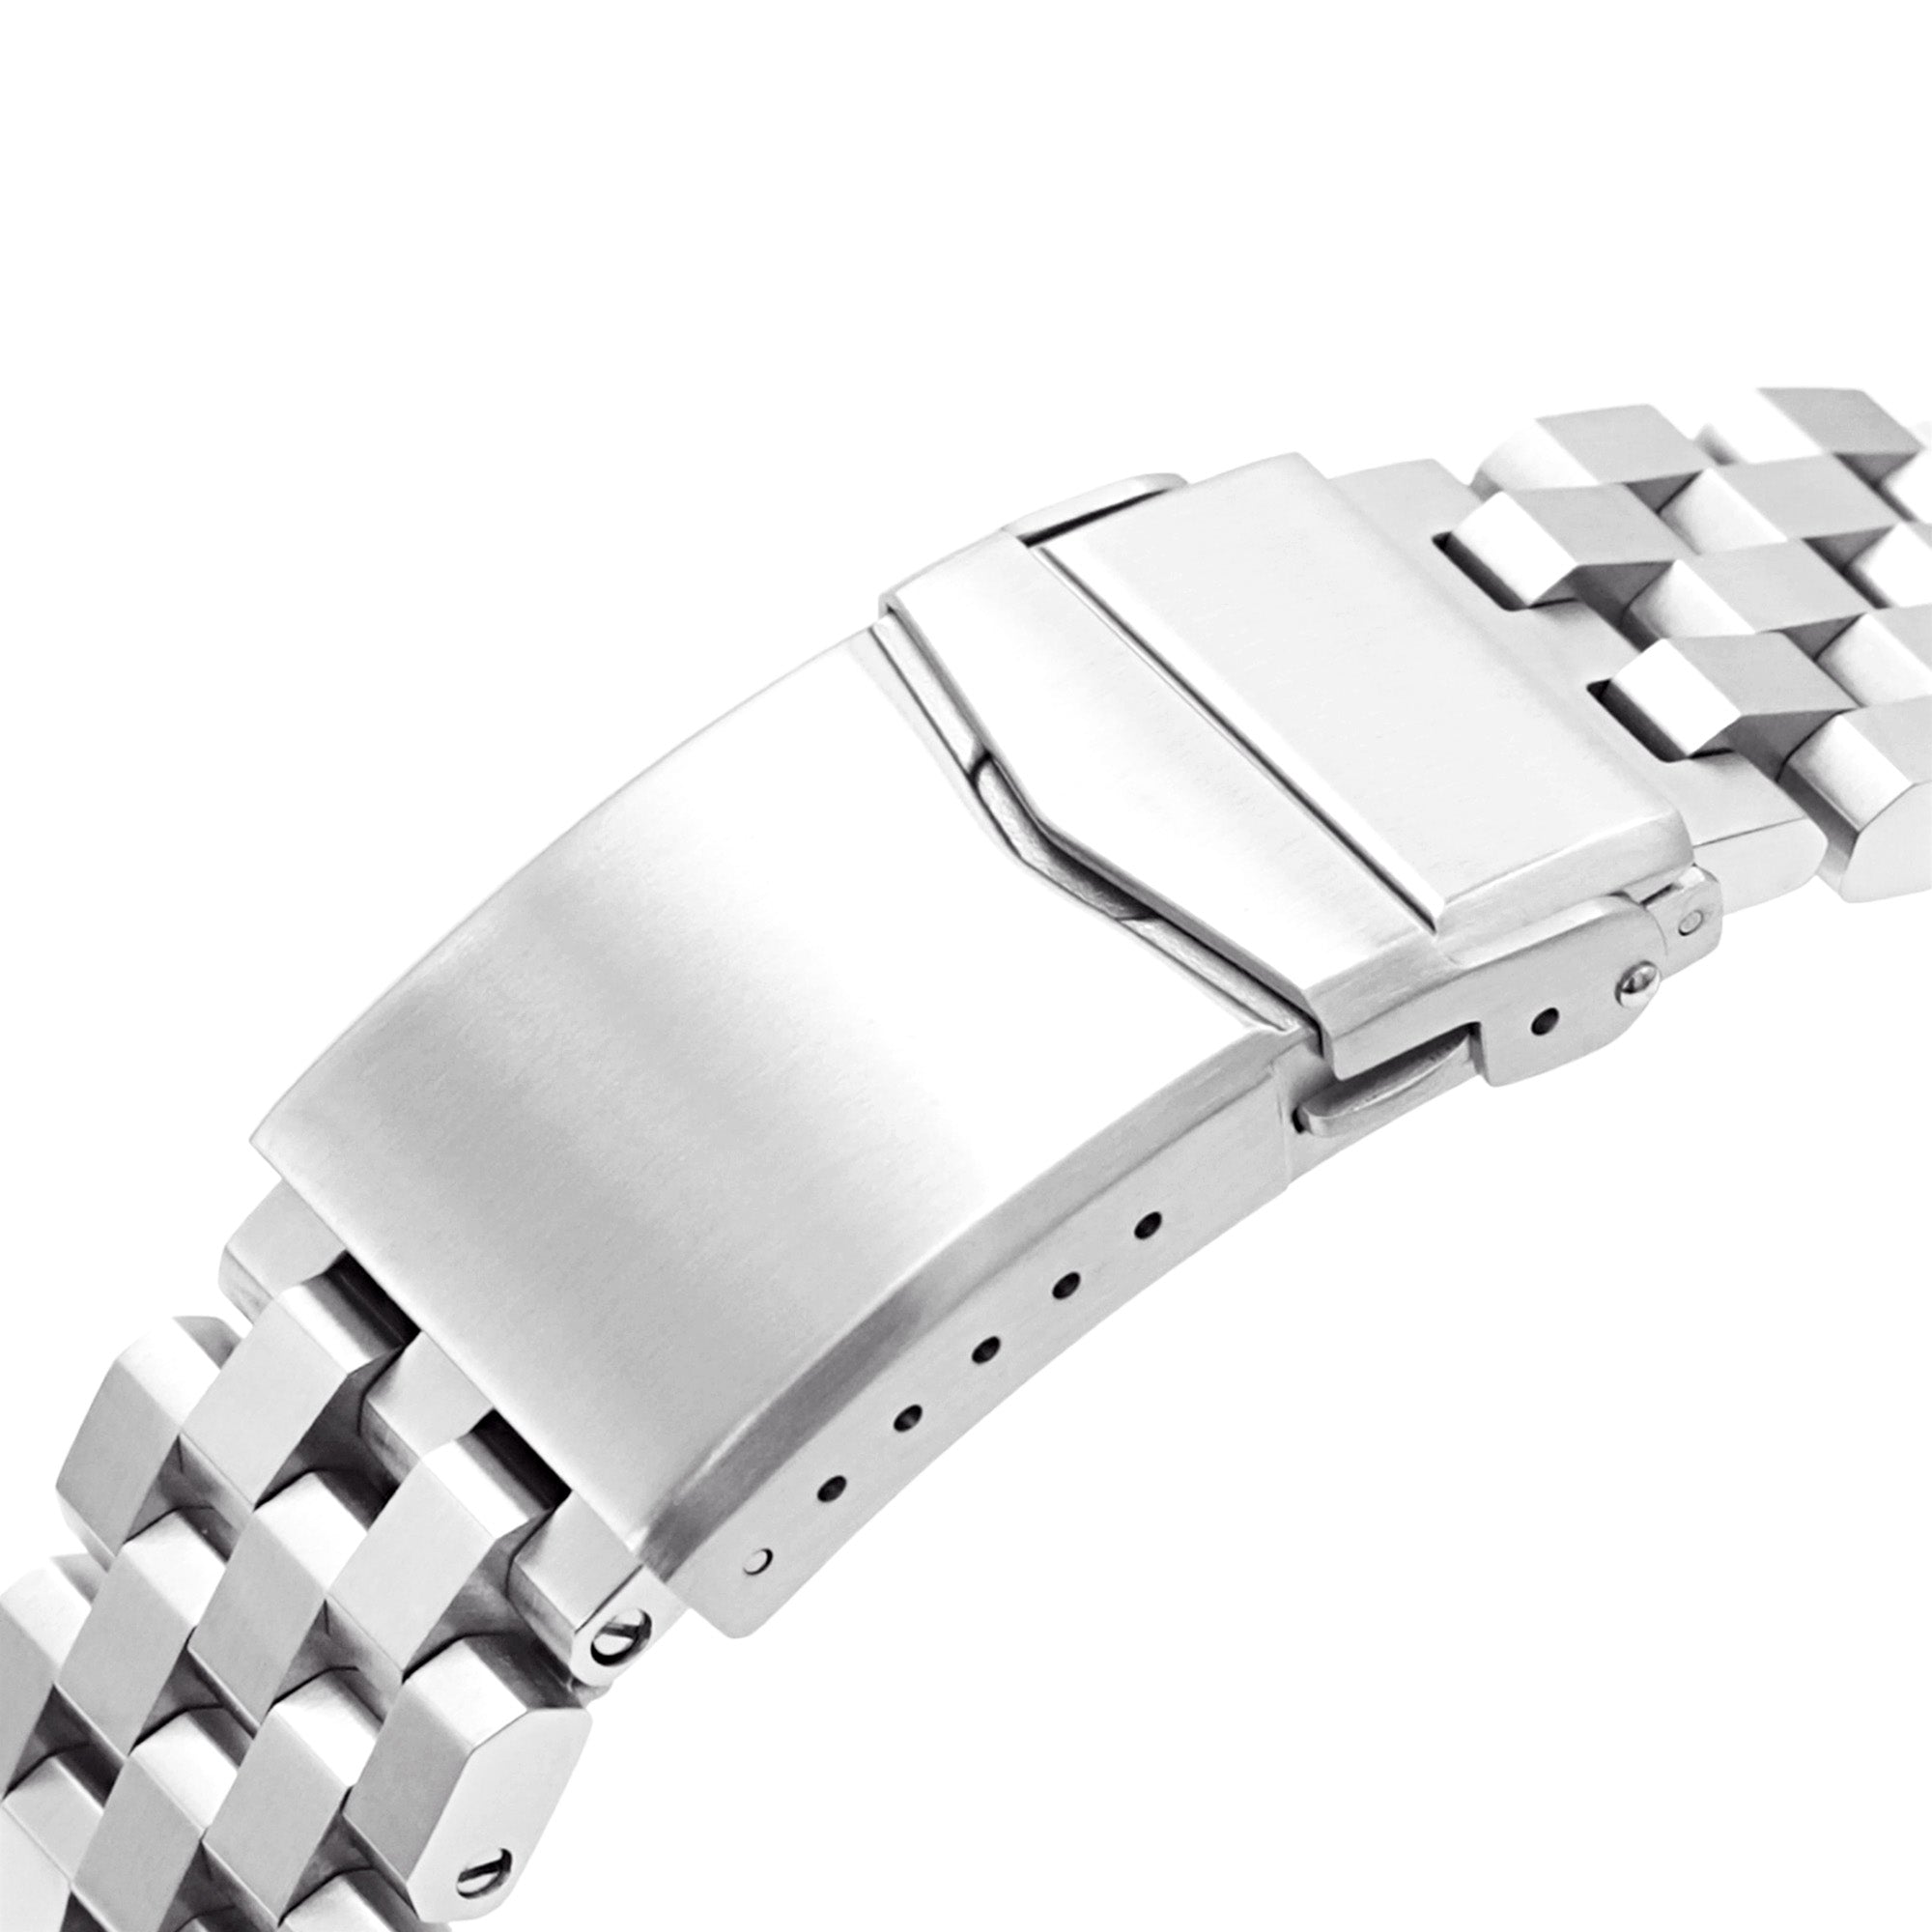 22mm Super Engineer II 316L Stainless Steel Watch Bracelet for Seiko New Turtles SRP777 & PADI SRPA21 V-Clasp Button Double Loc Strapcode Watch Bands